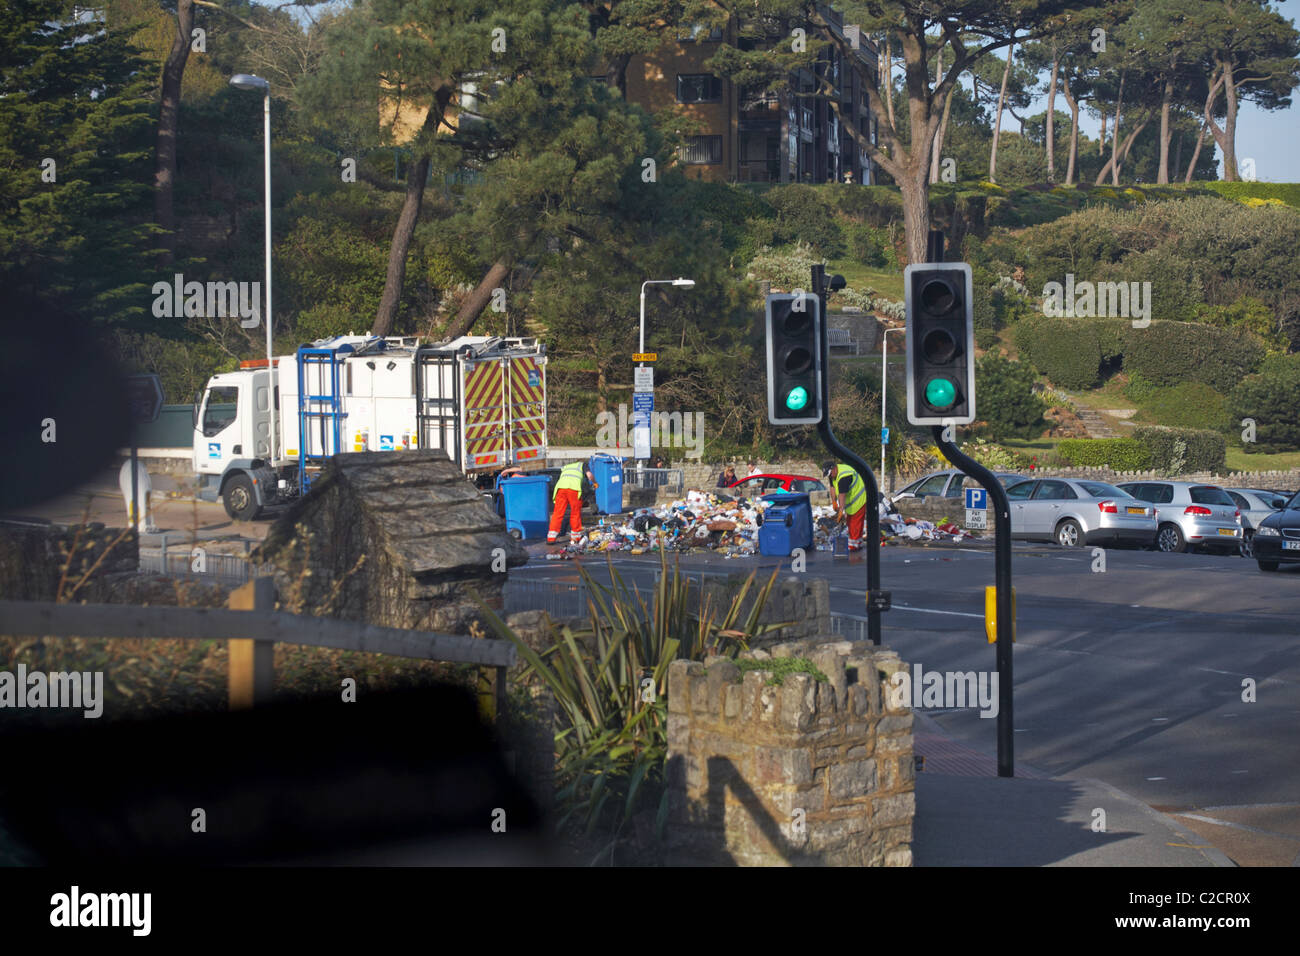 Council workers clearing up piles of rubbish in road with wheelie bins upturned at Branksome Chine in April Stock Photo